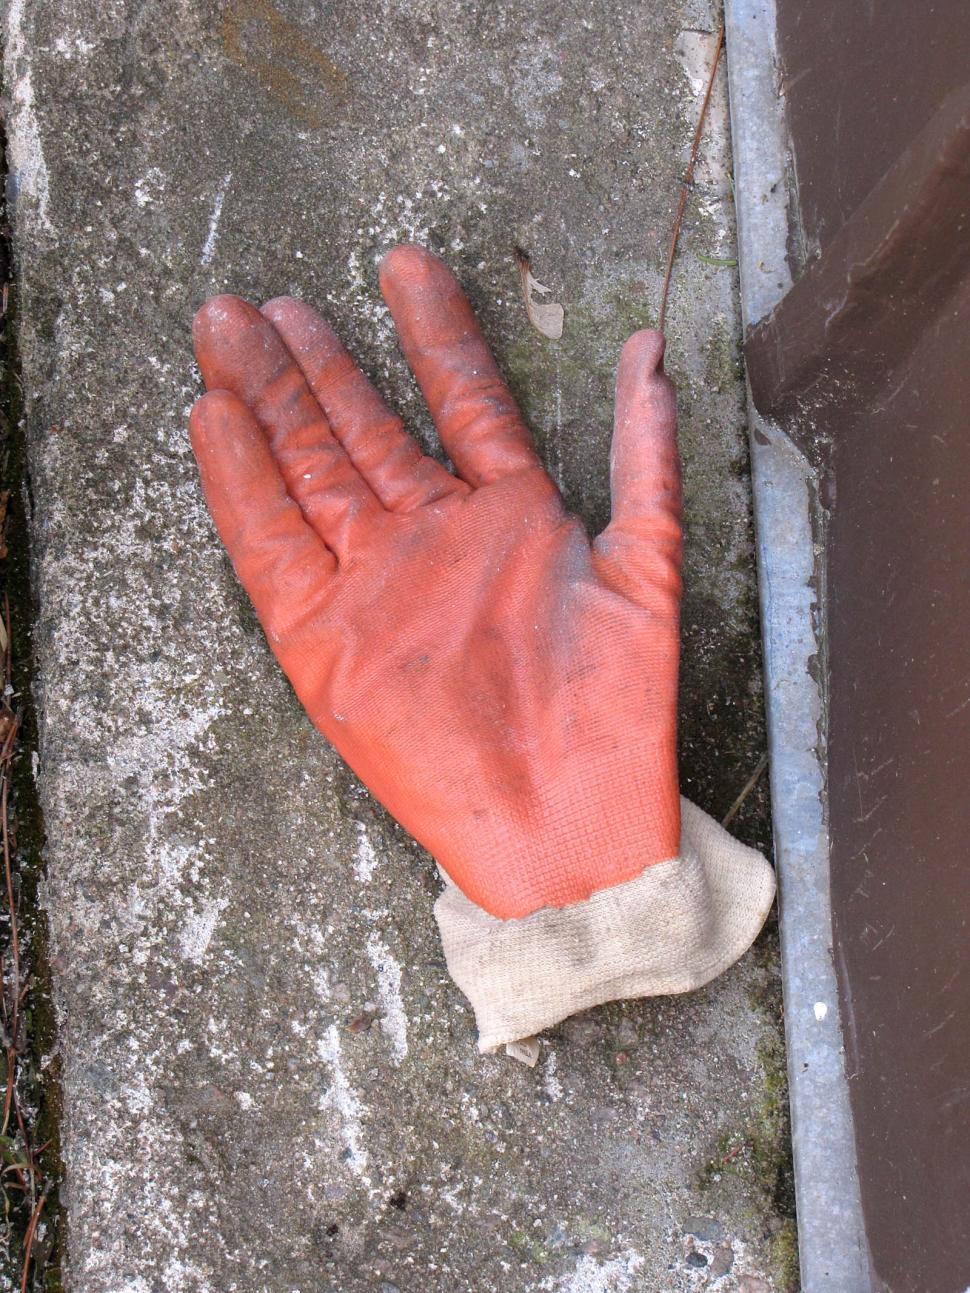 Free Image of Discarded Glove Near Trash Can 